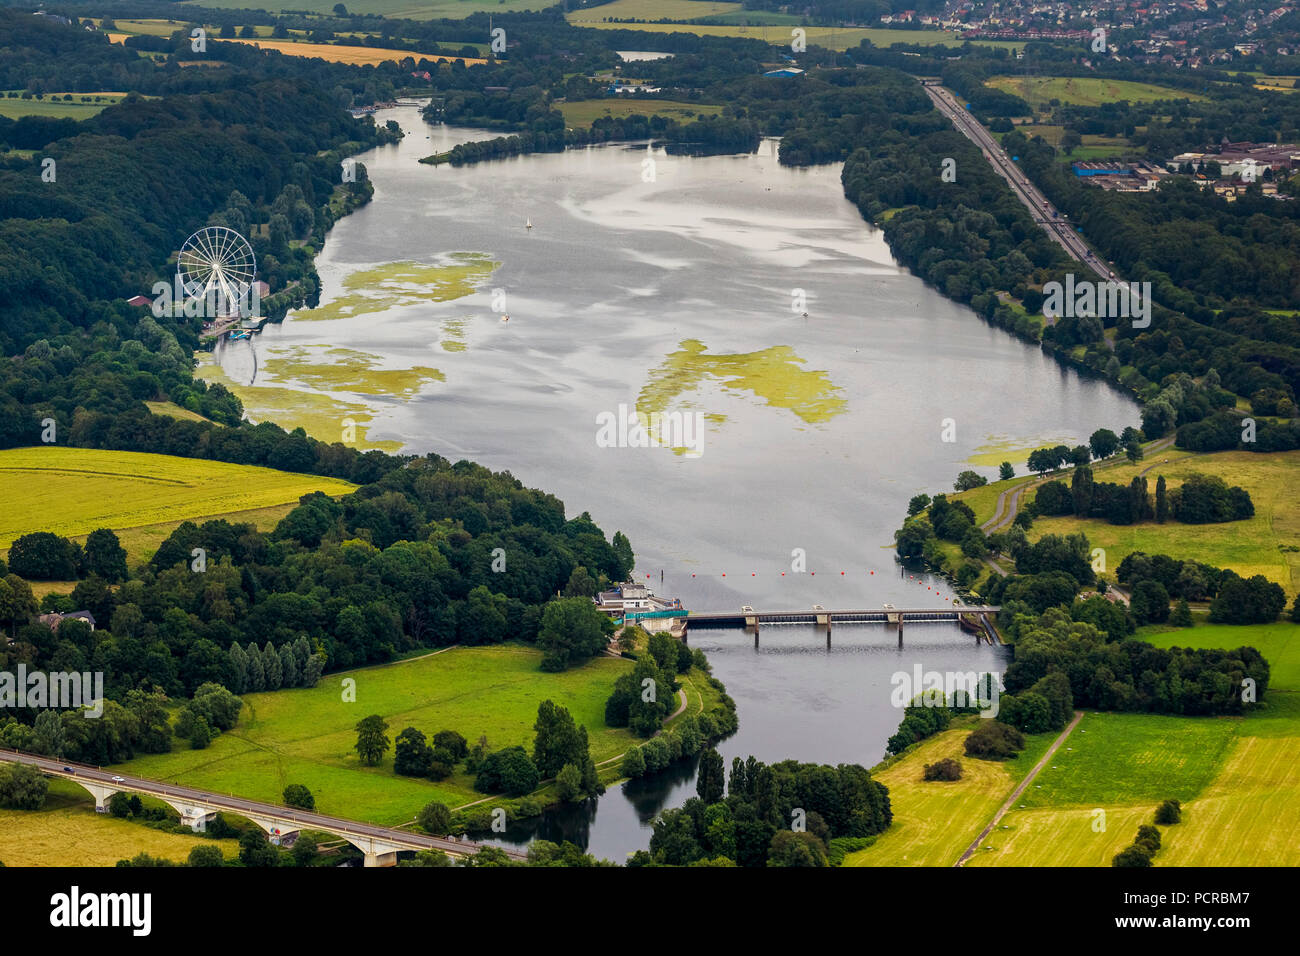 Ruhrverband Hydroelectric Power Plant, aquatic plant, Elodea nuttallii, waterweed, Kemnader See Reservoir on the boundaries of the cities of Witten, Bochum and Hattingen, Ruhr River, Ruhrverband (public-law water supplier), Witten, Ruhr area, North Rhine-Westphalia, Germany Stock Photo